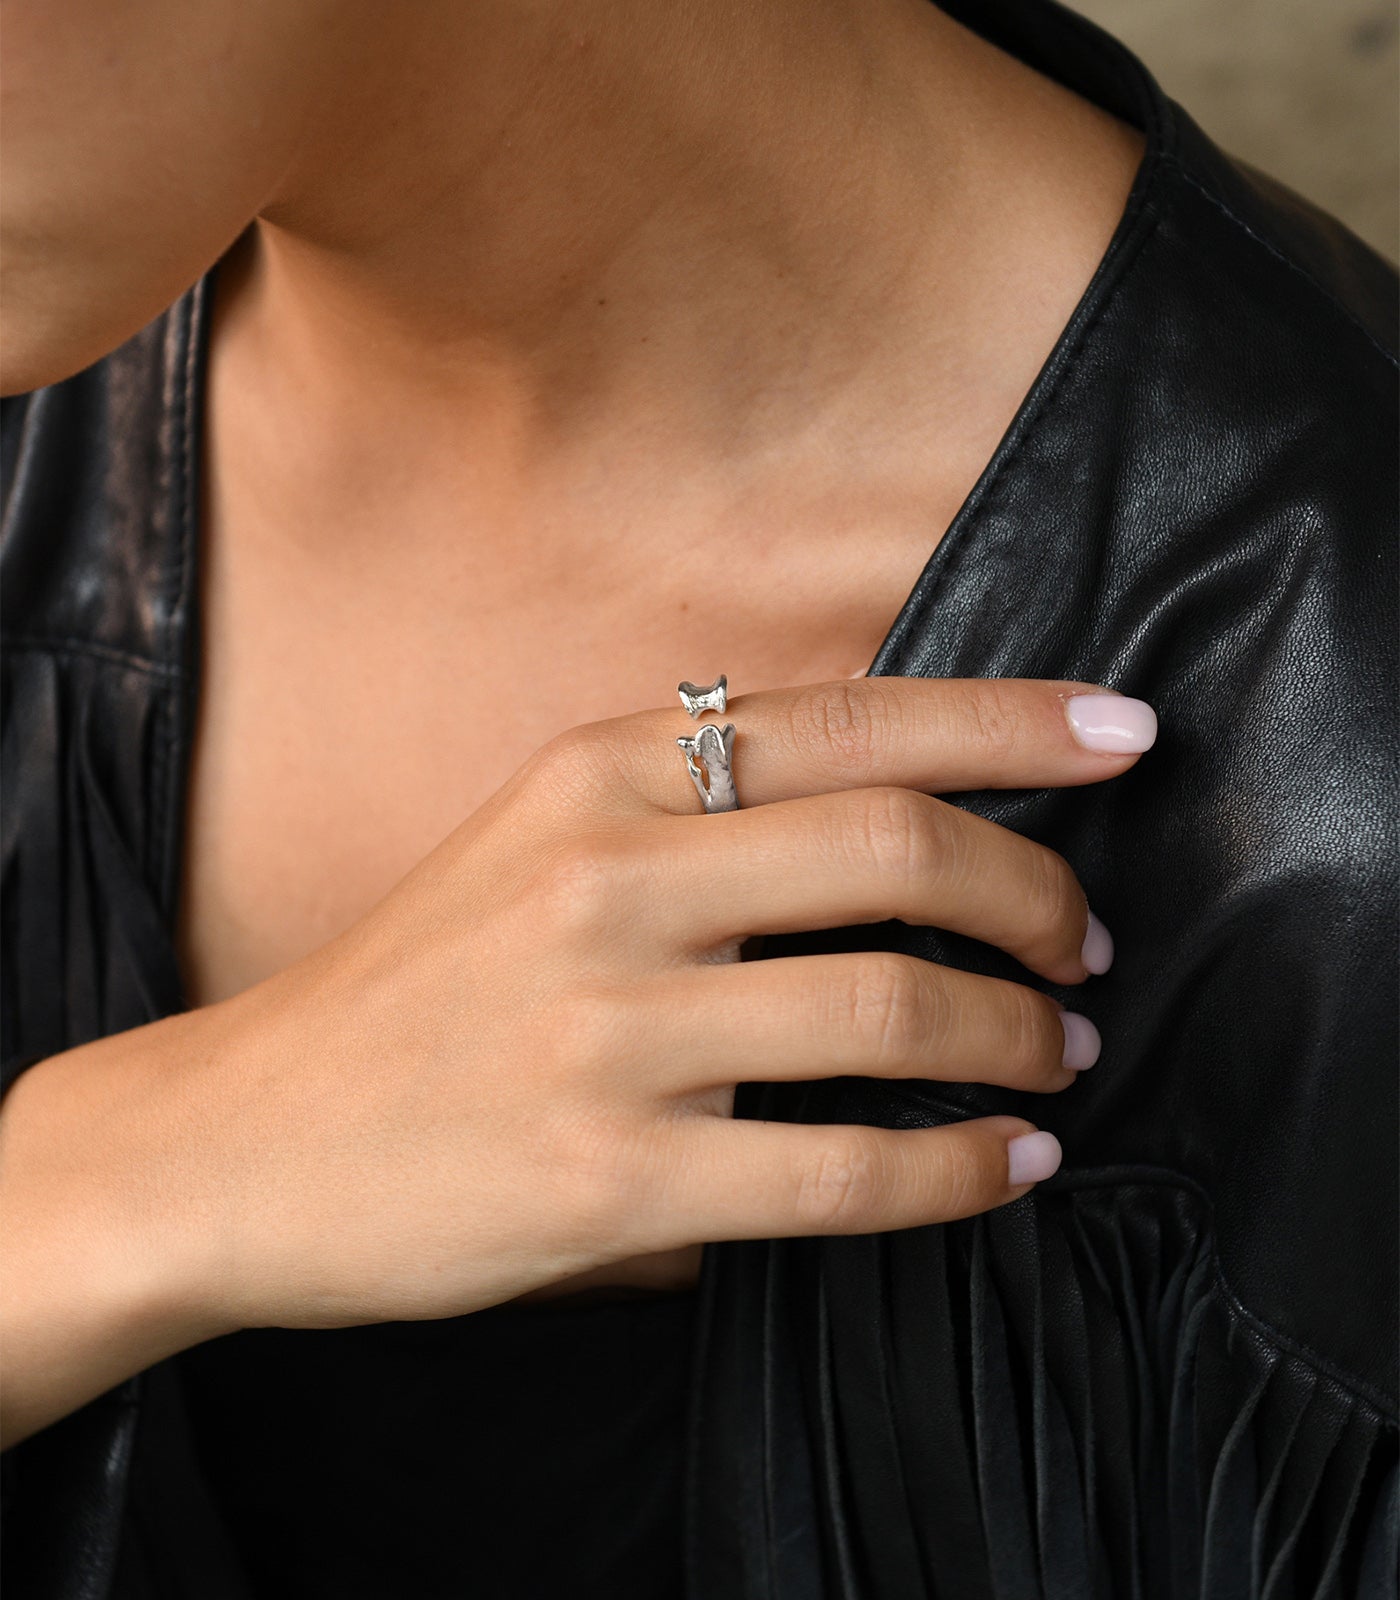 A model wears a sterling silver ring with an open band design. The ring also has a bone detailing.